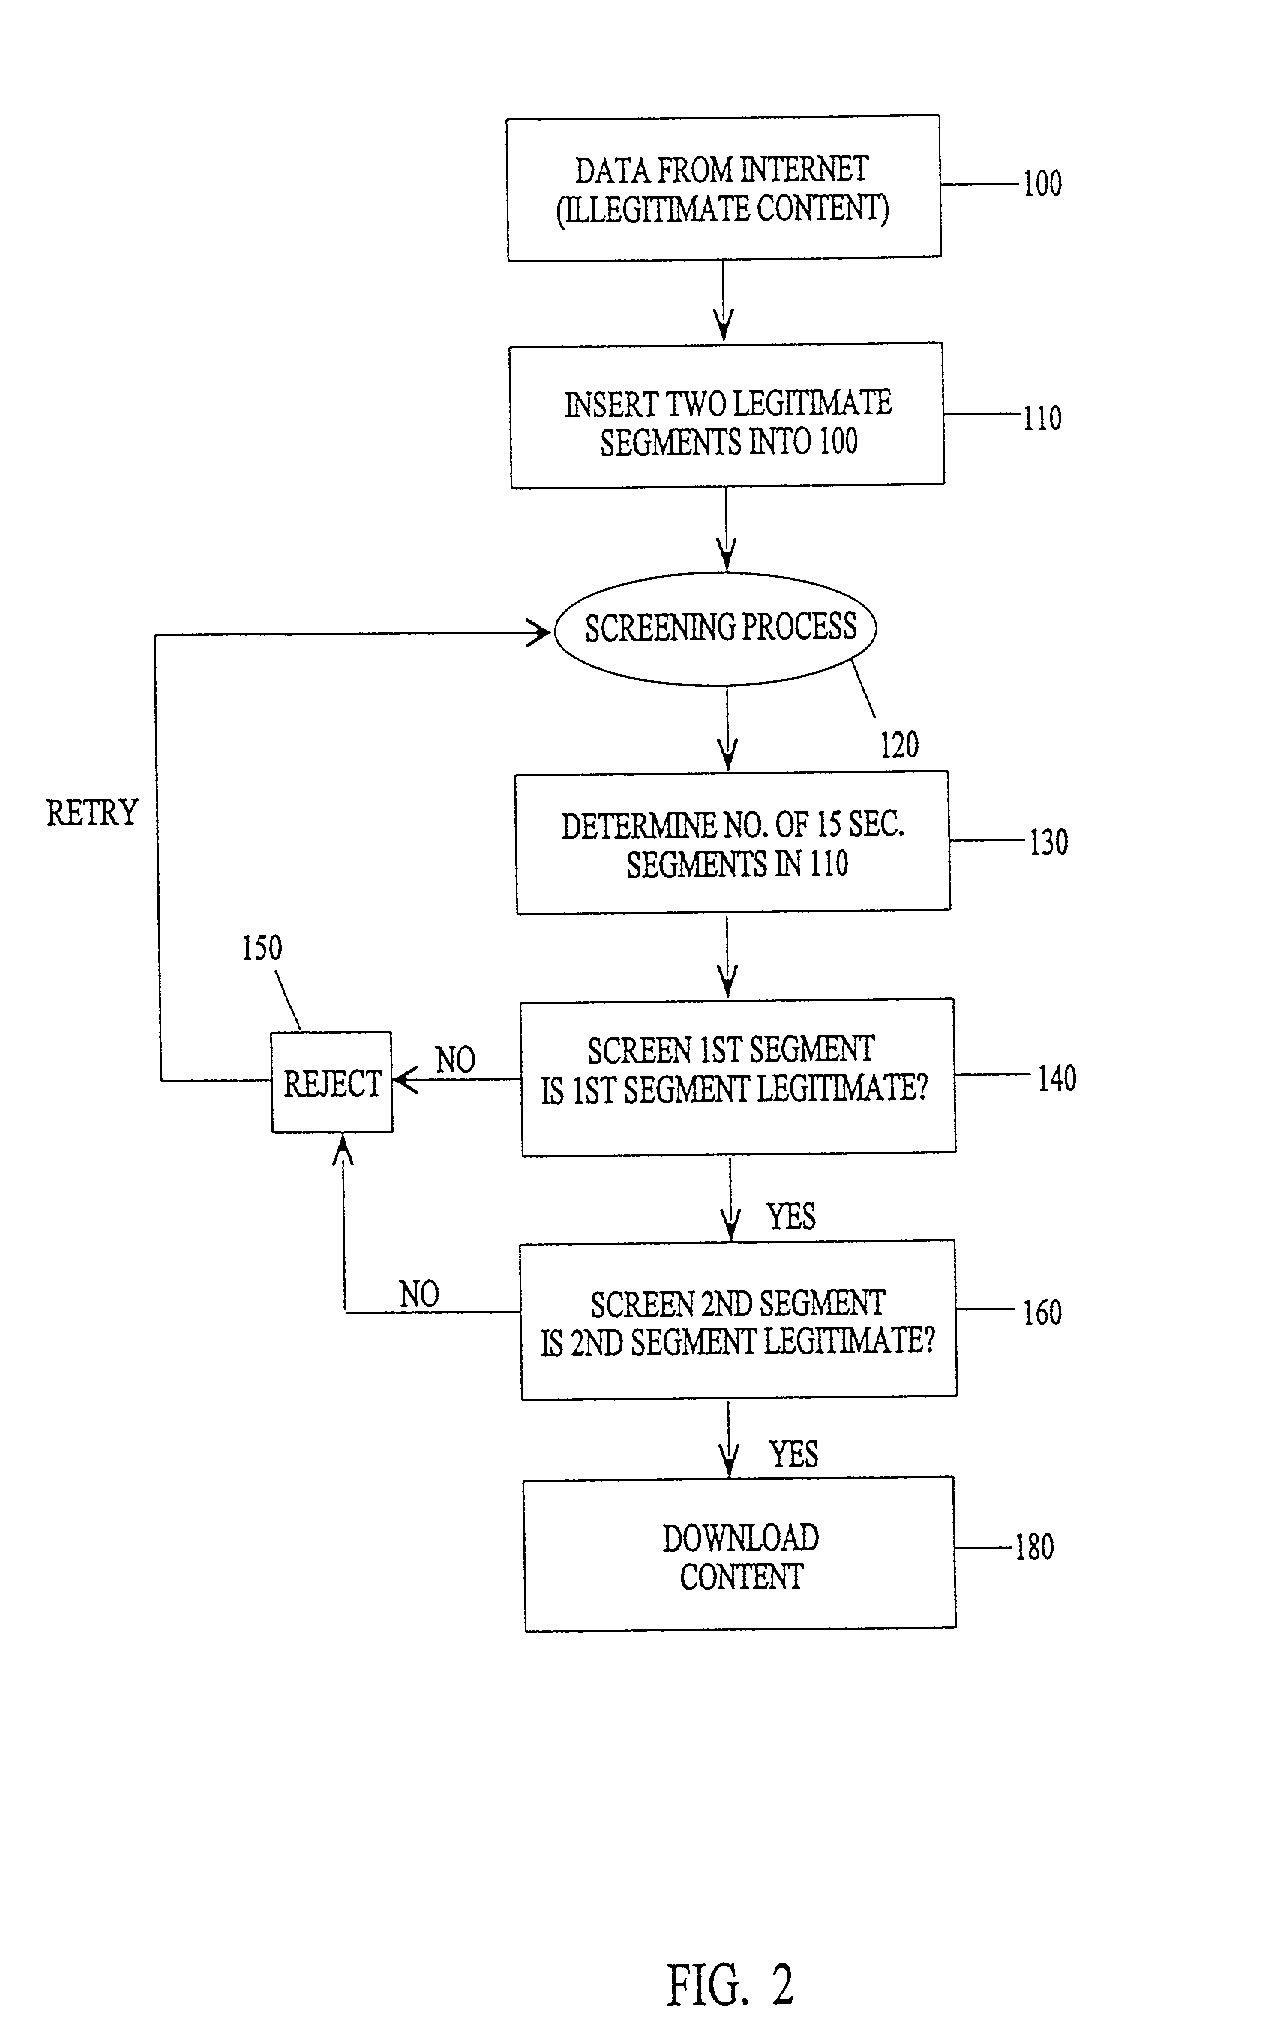 Methods of attack on a content screening algorithm based on adulteration of marked content